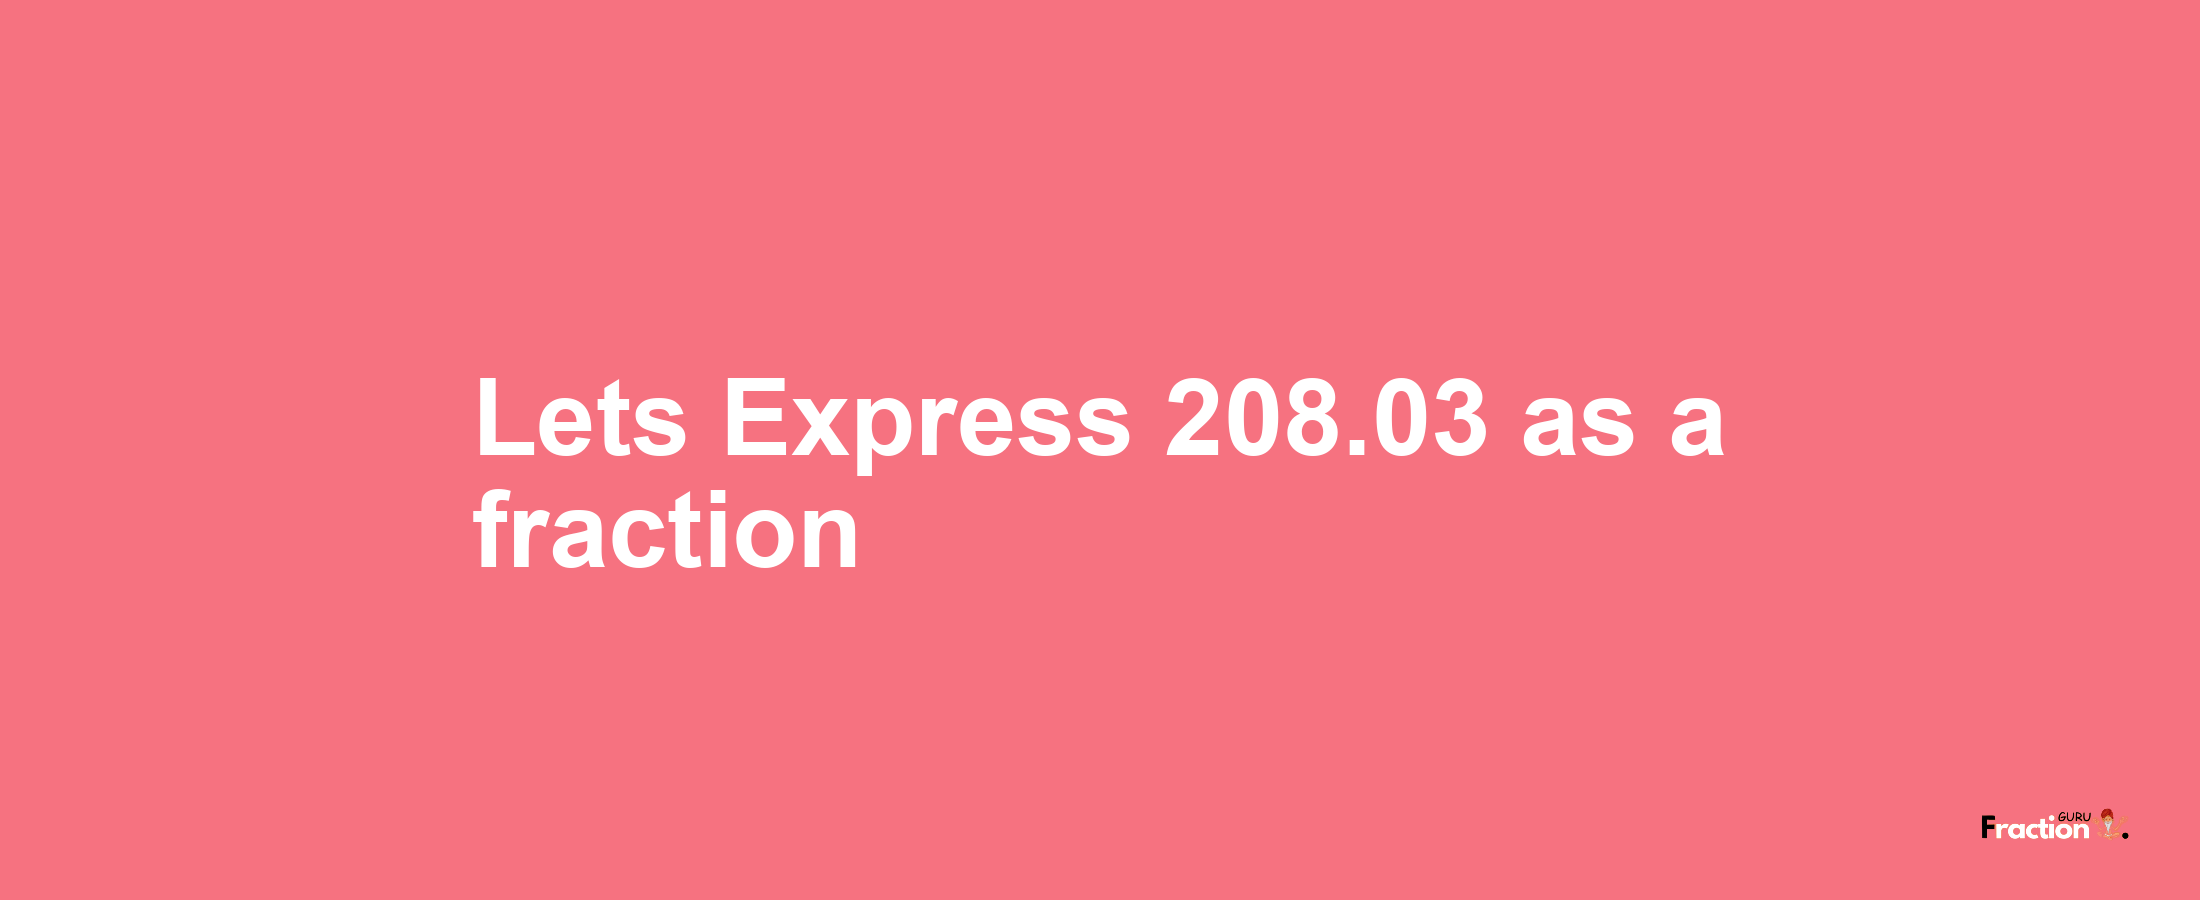 Lets Express 208.03 as afraction